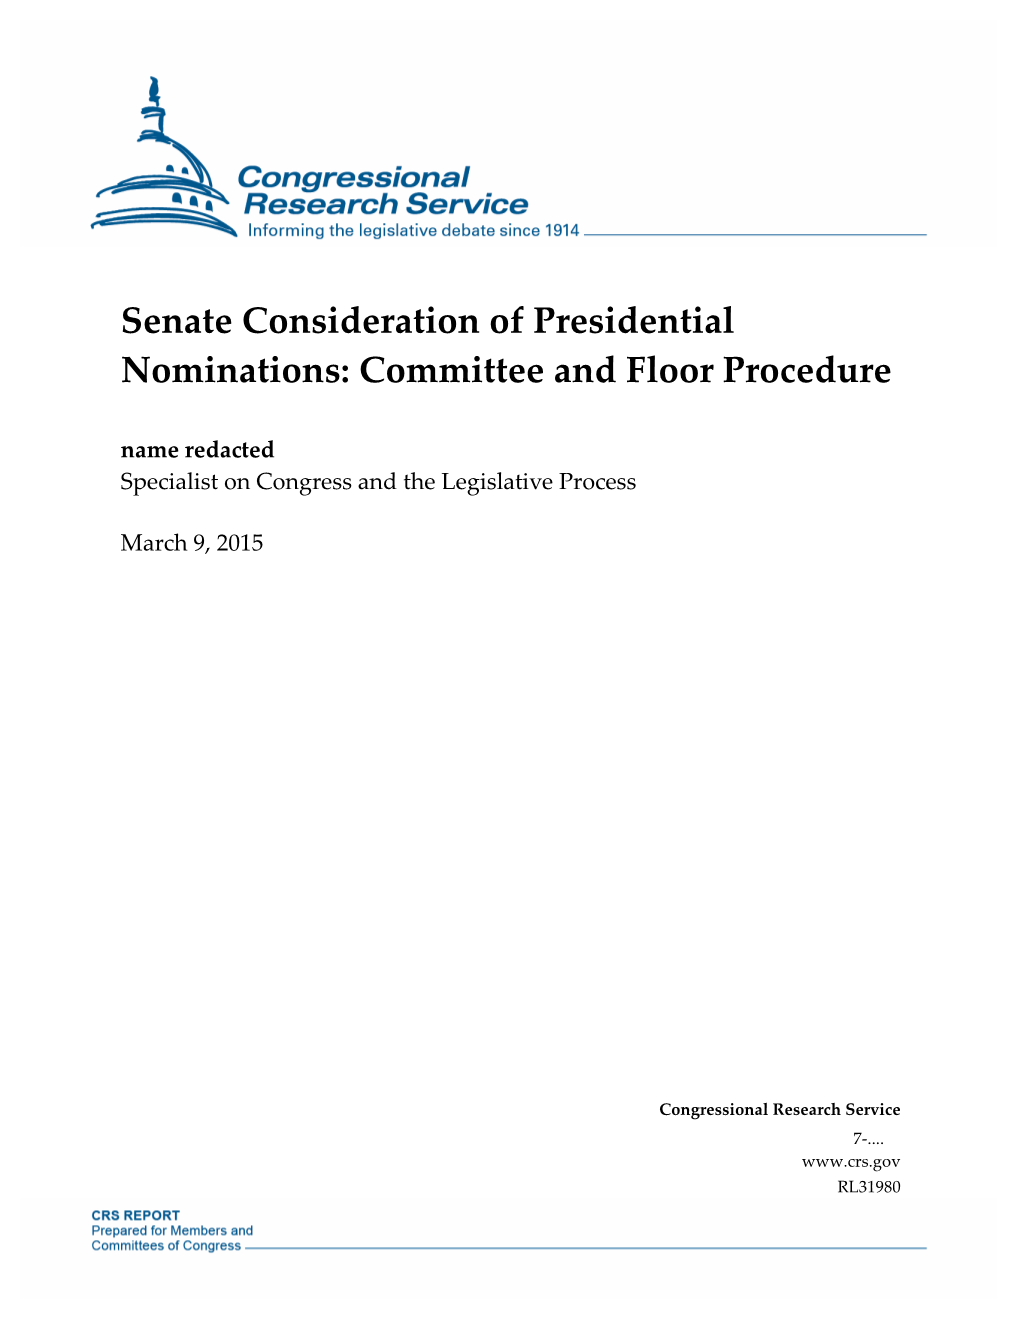 Senate Consideration of Presidential Nominations: Committee and Floor Procedure Name Redacted Specialist on Congress and the Legislative Process